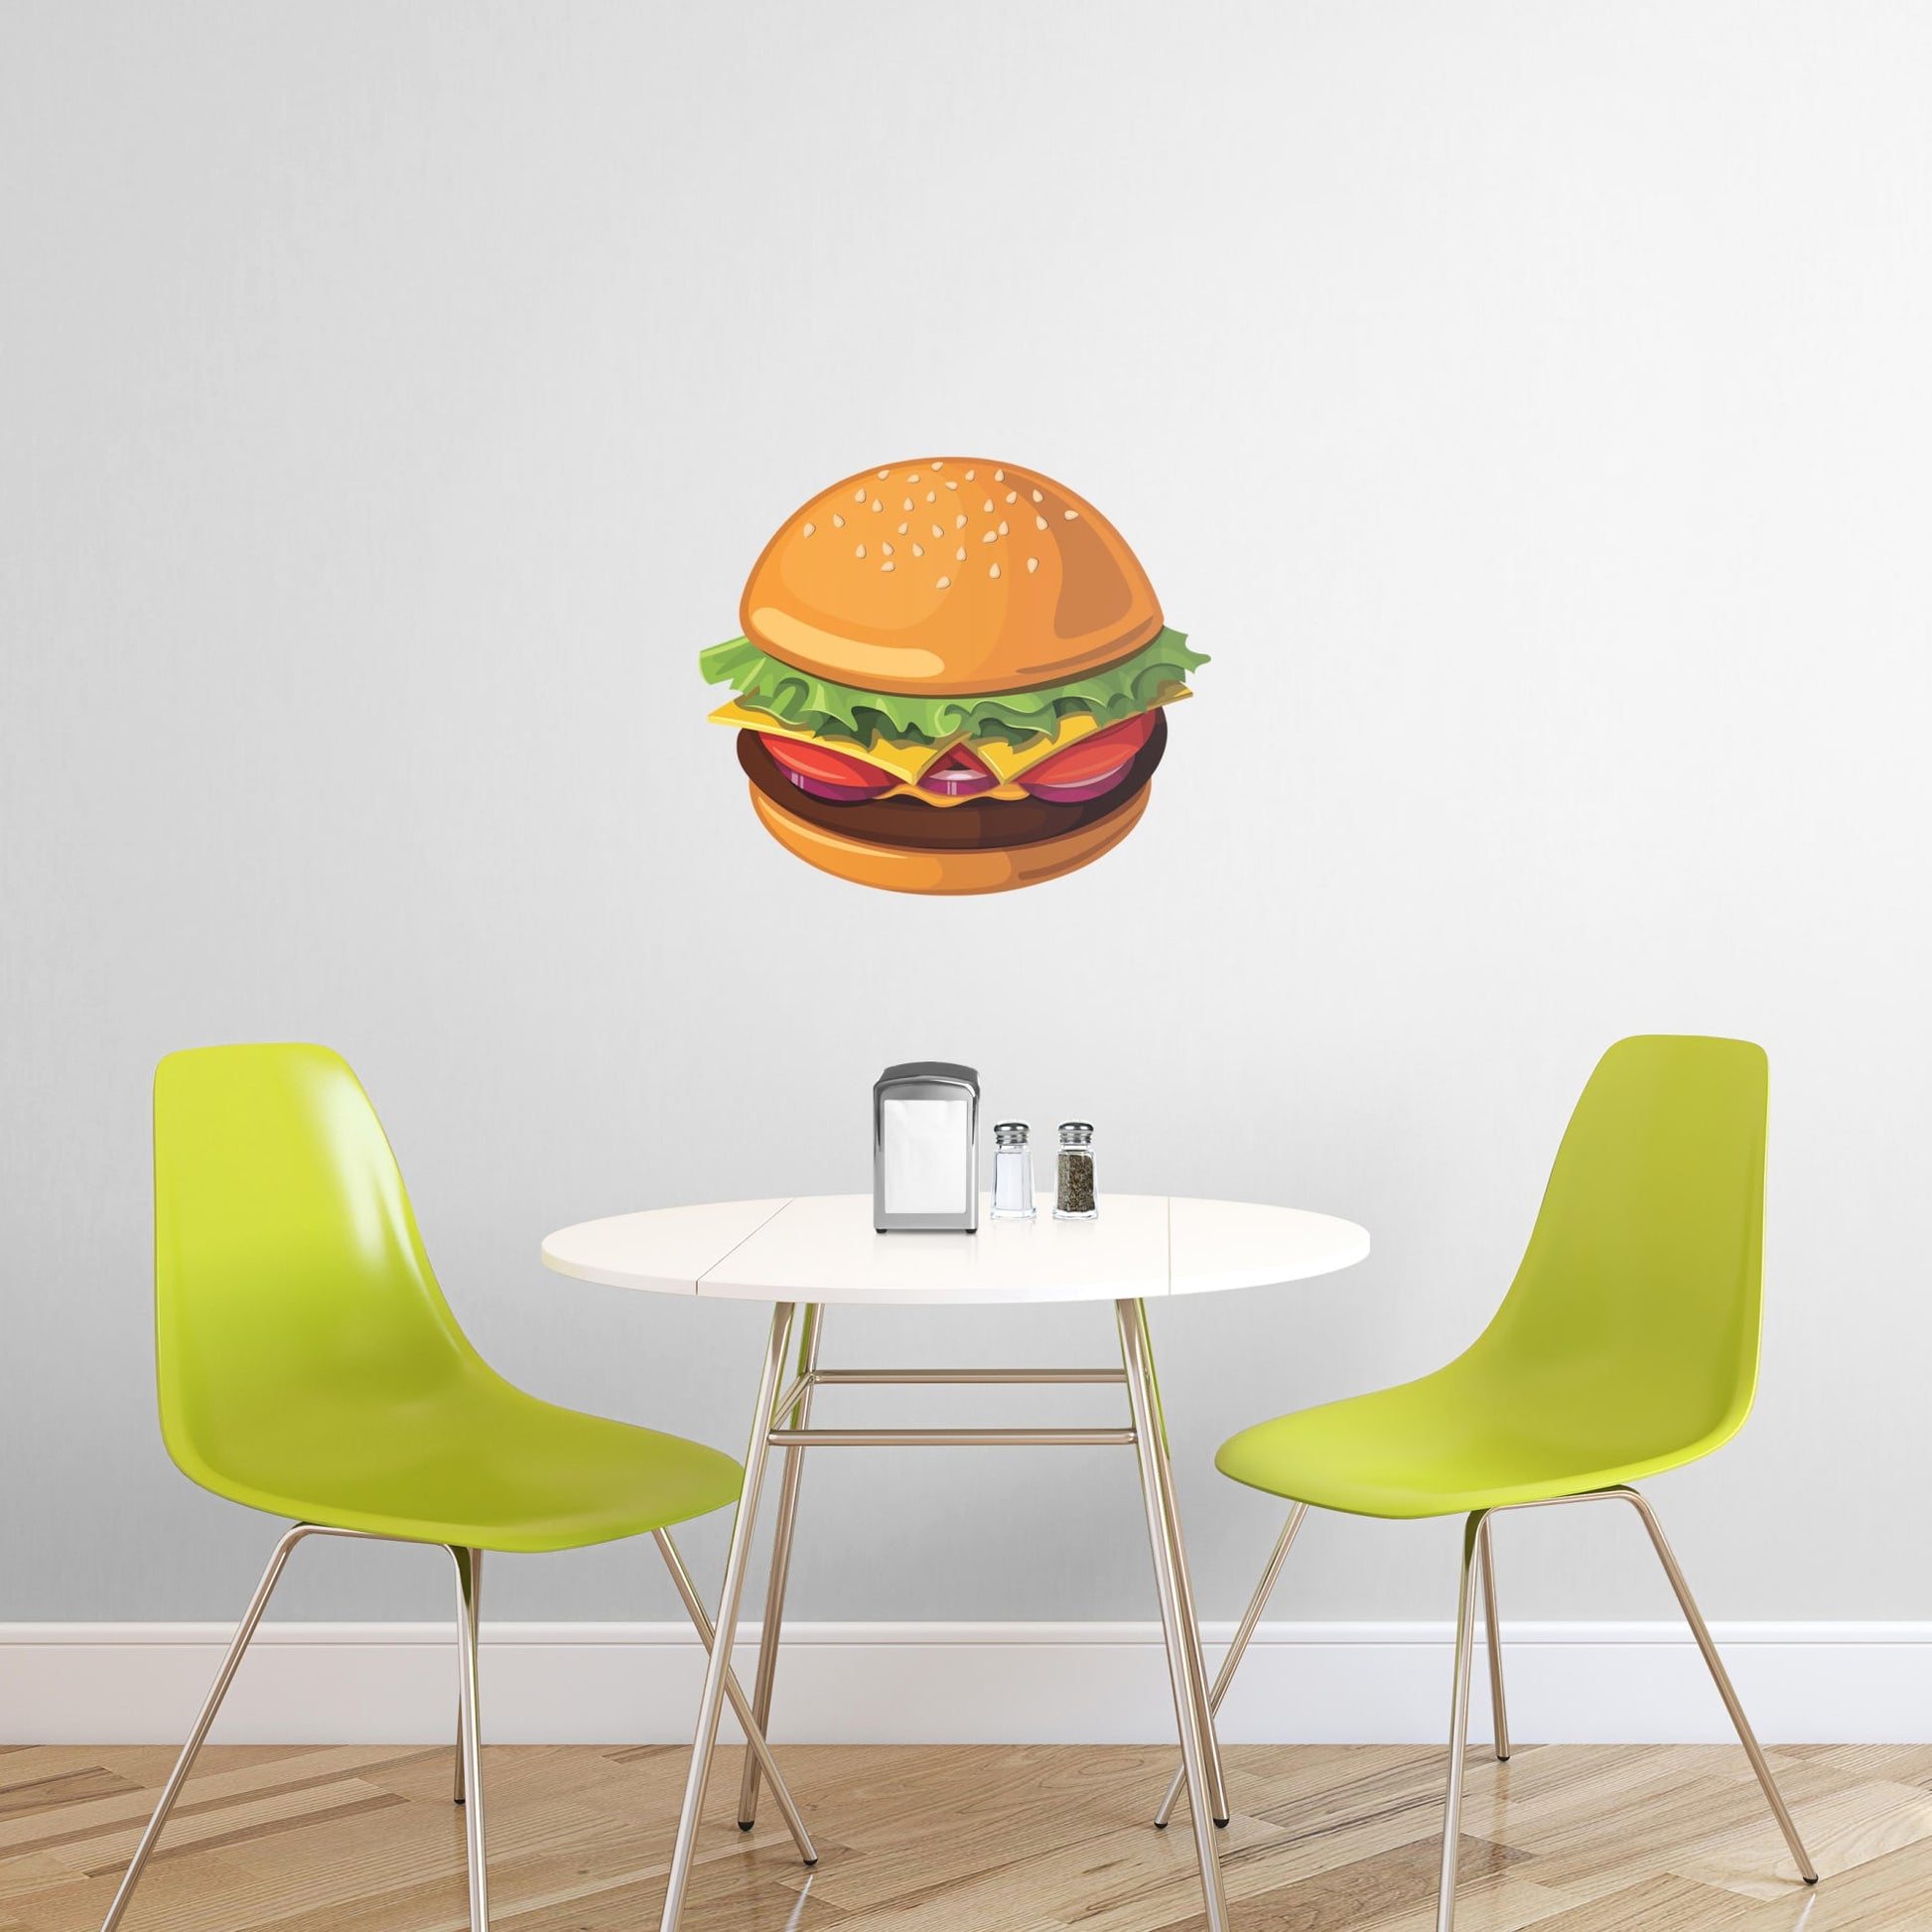 X-Large Cheeseburger + 2 Decals (30"W x 23"H)